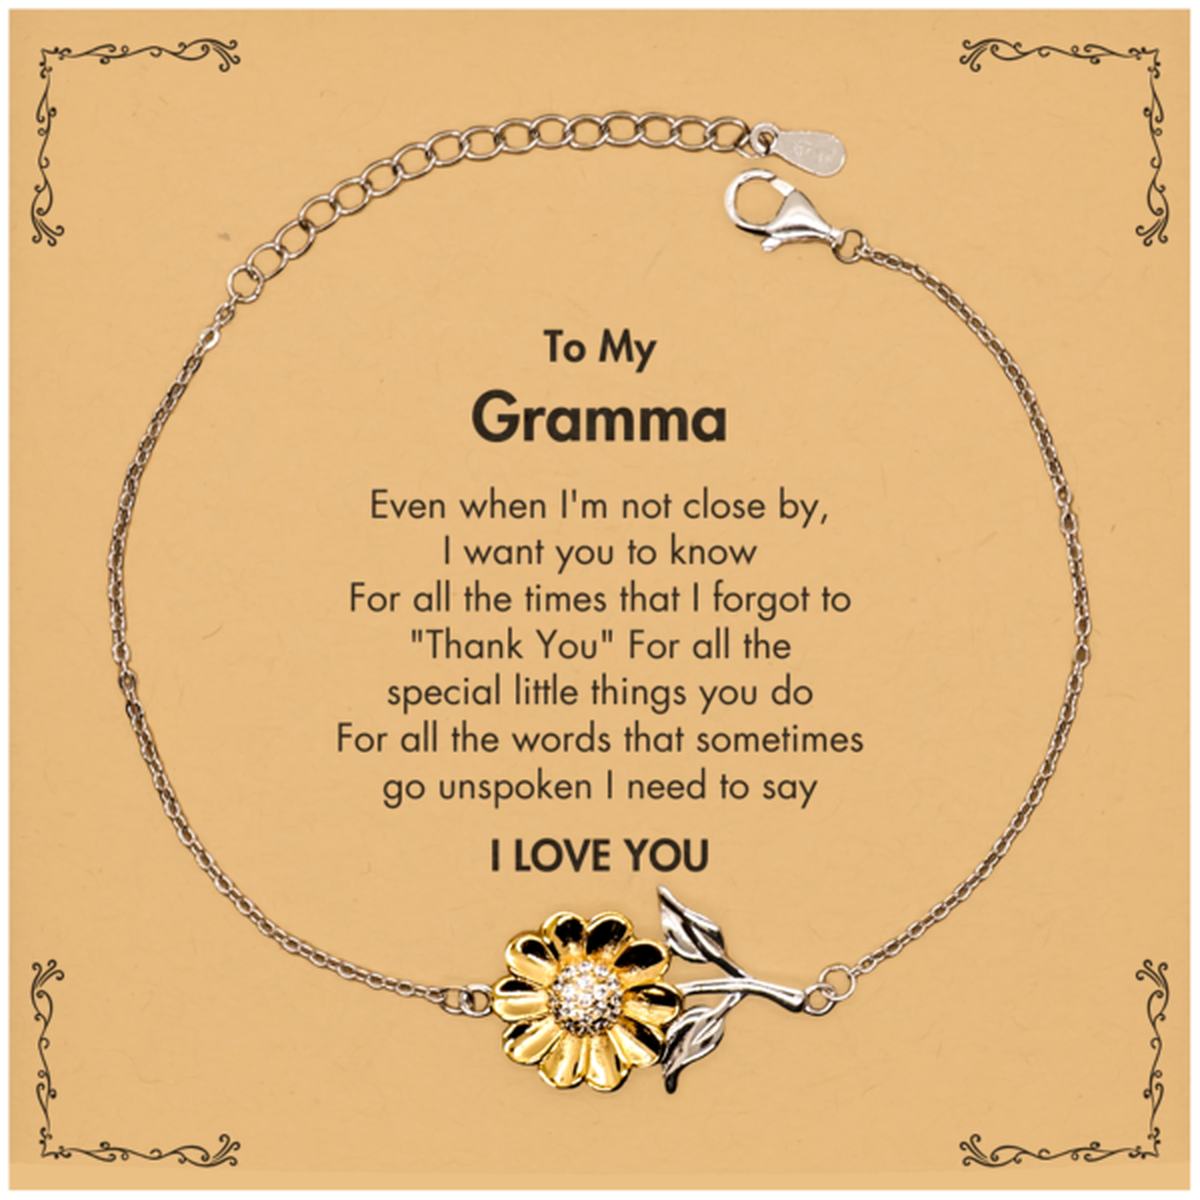 Thank You Gifts for Gramma, Keepsake Sunflower Bracelet Gifts for Gramma Birthday Mother's day Father's Day Gramma For all the words That sometimes go unspoken I need to say I LOVE YOU